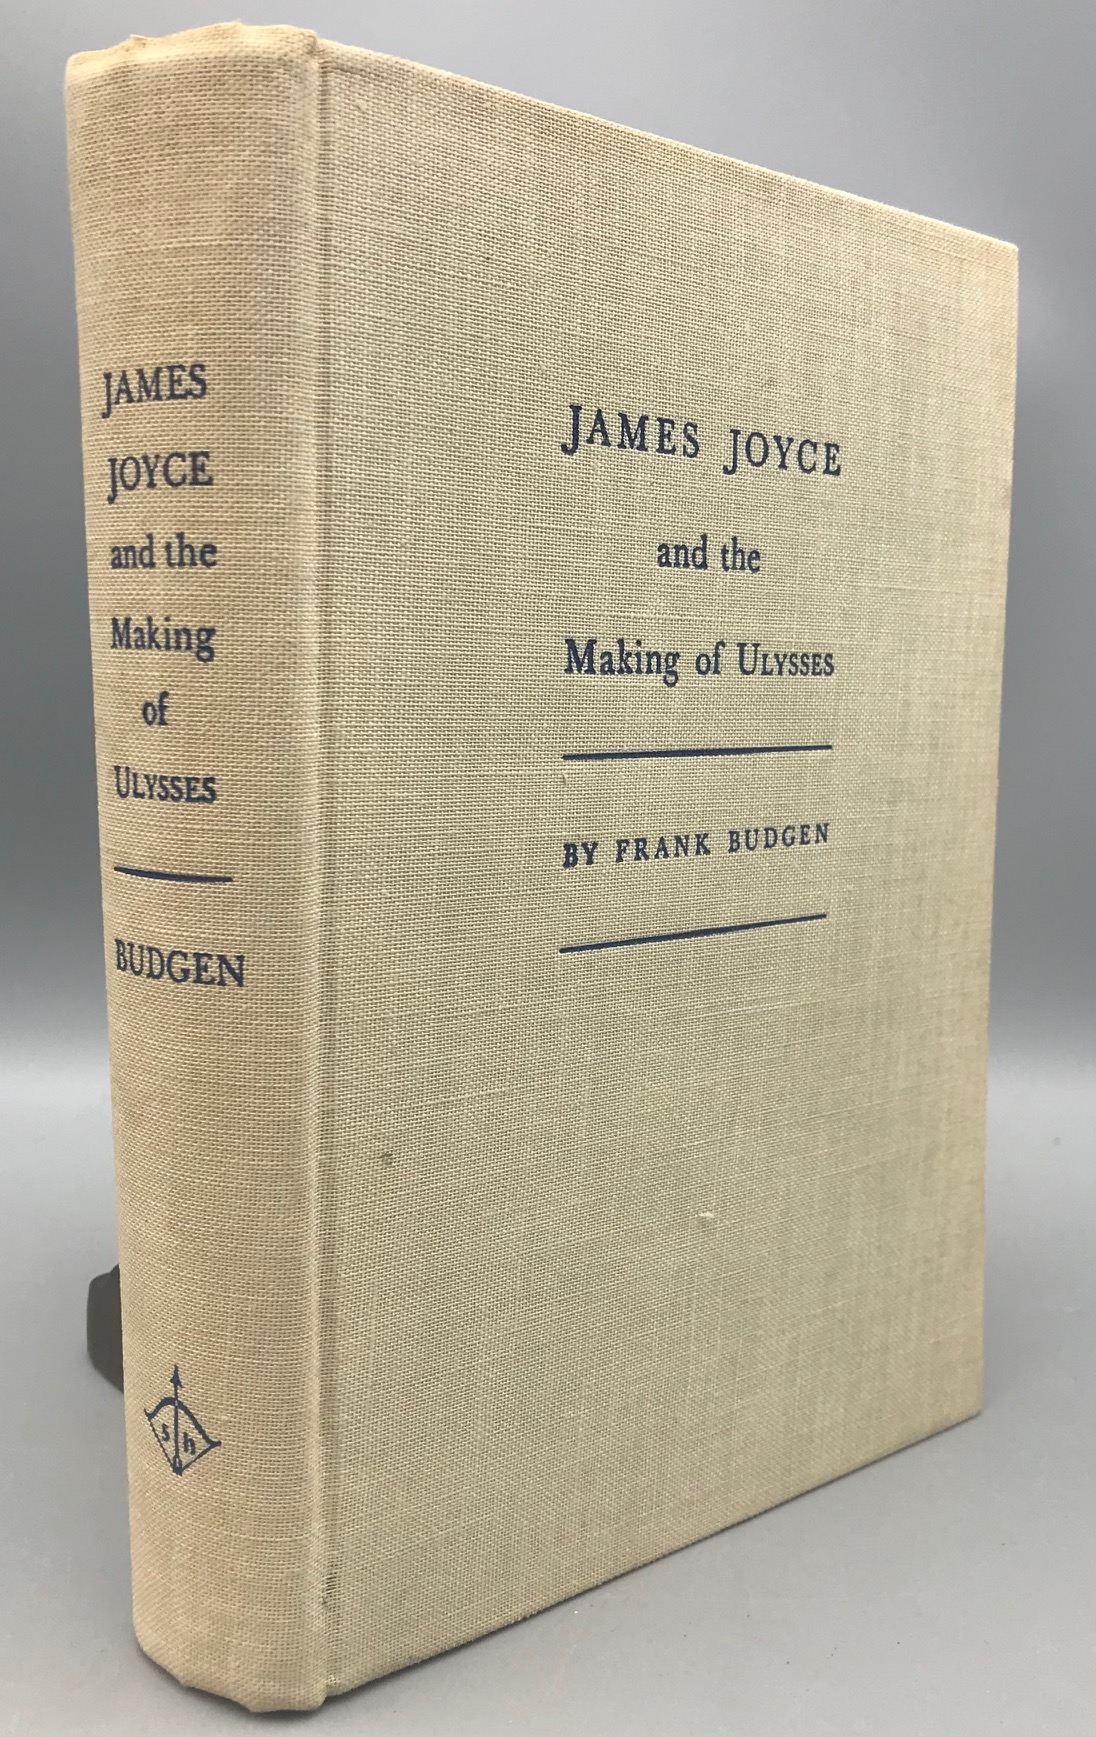 JAMES JOYCE AND THE MAKING OF ULYSSES, by Frank Budgen - 1934 [1st U.S. edition ]